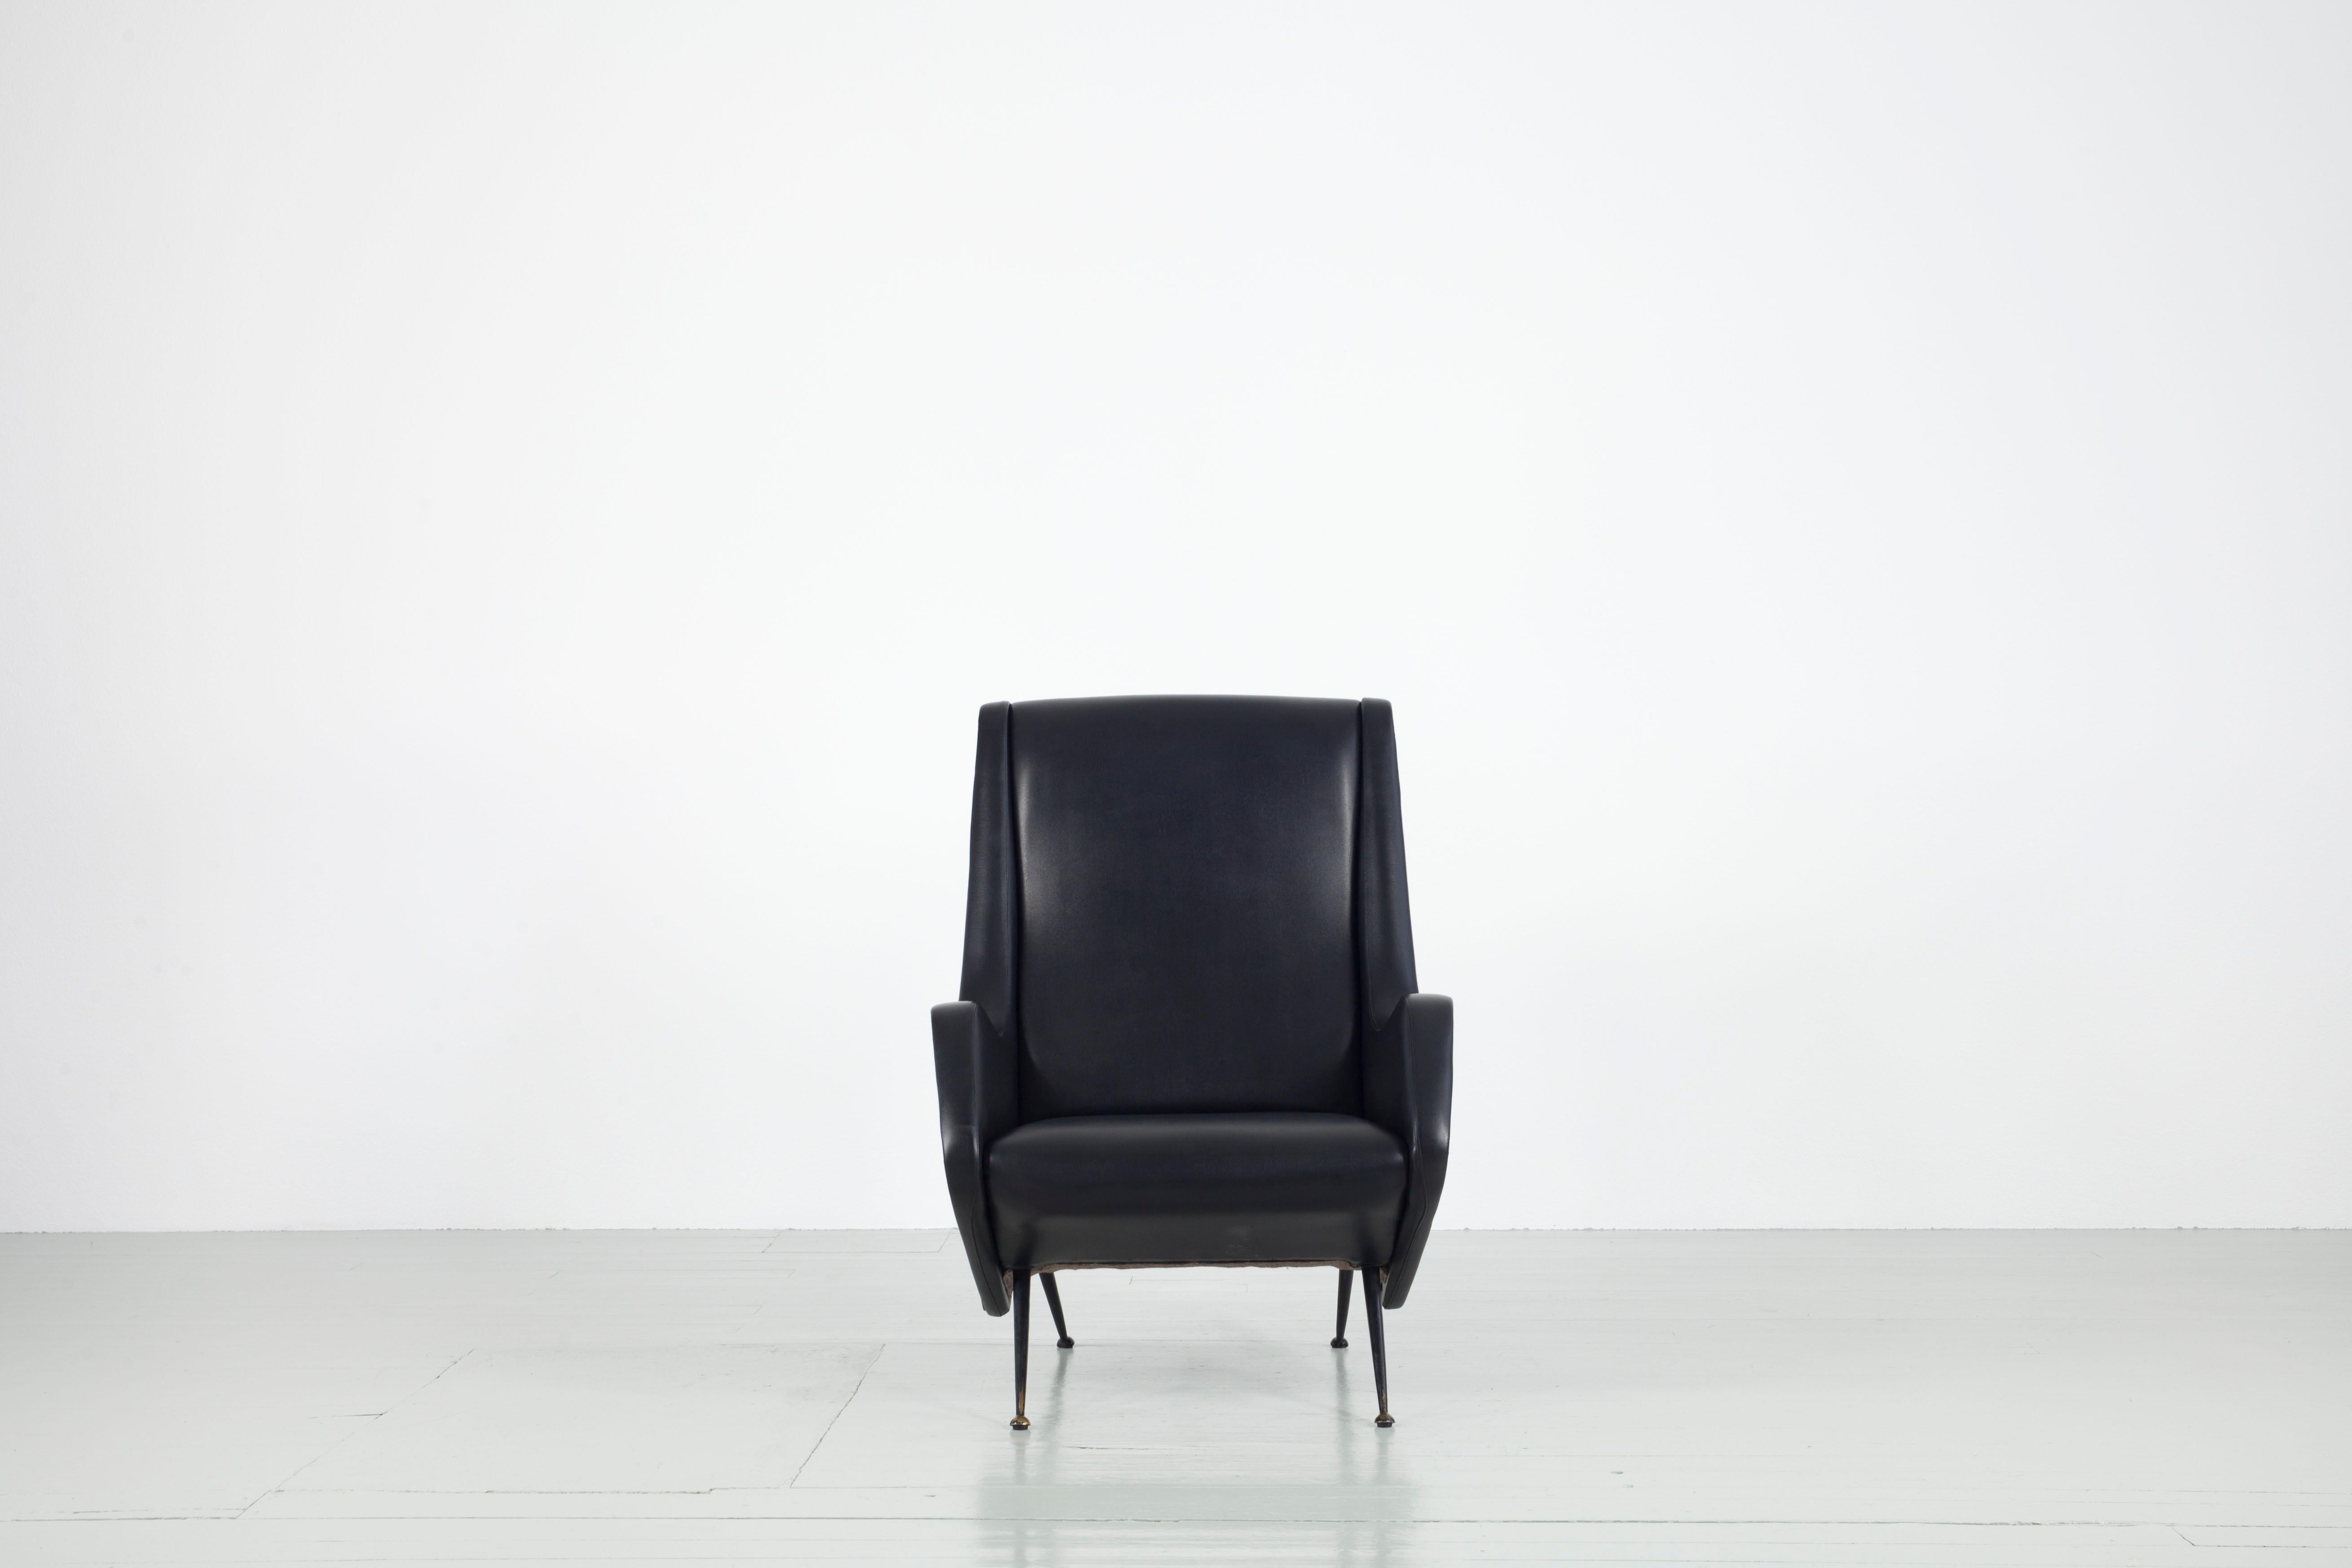 Armchair designed by Aldo Morbelli, manufactured by ISA Bergamo, Italy, 1950s. The piece is in perfect original vintage condition and has black vinyl leather covering.

